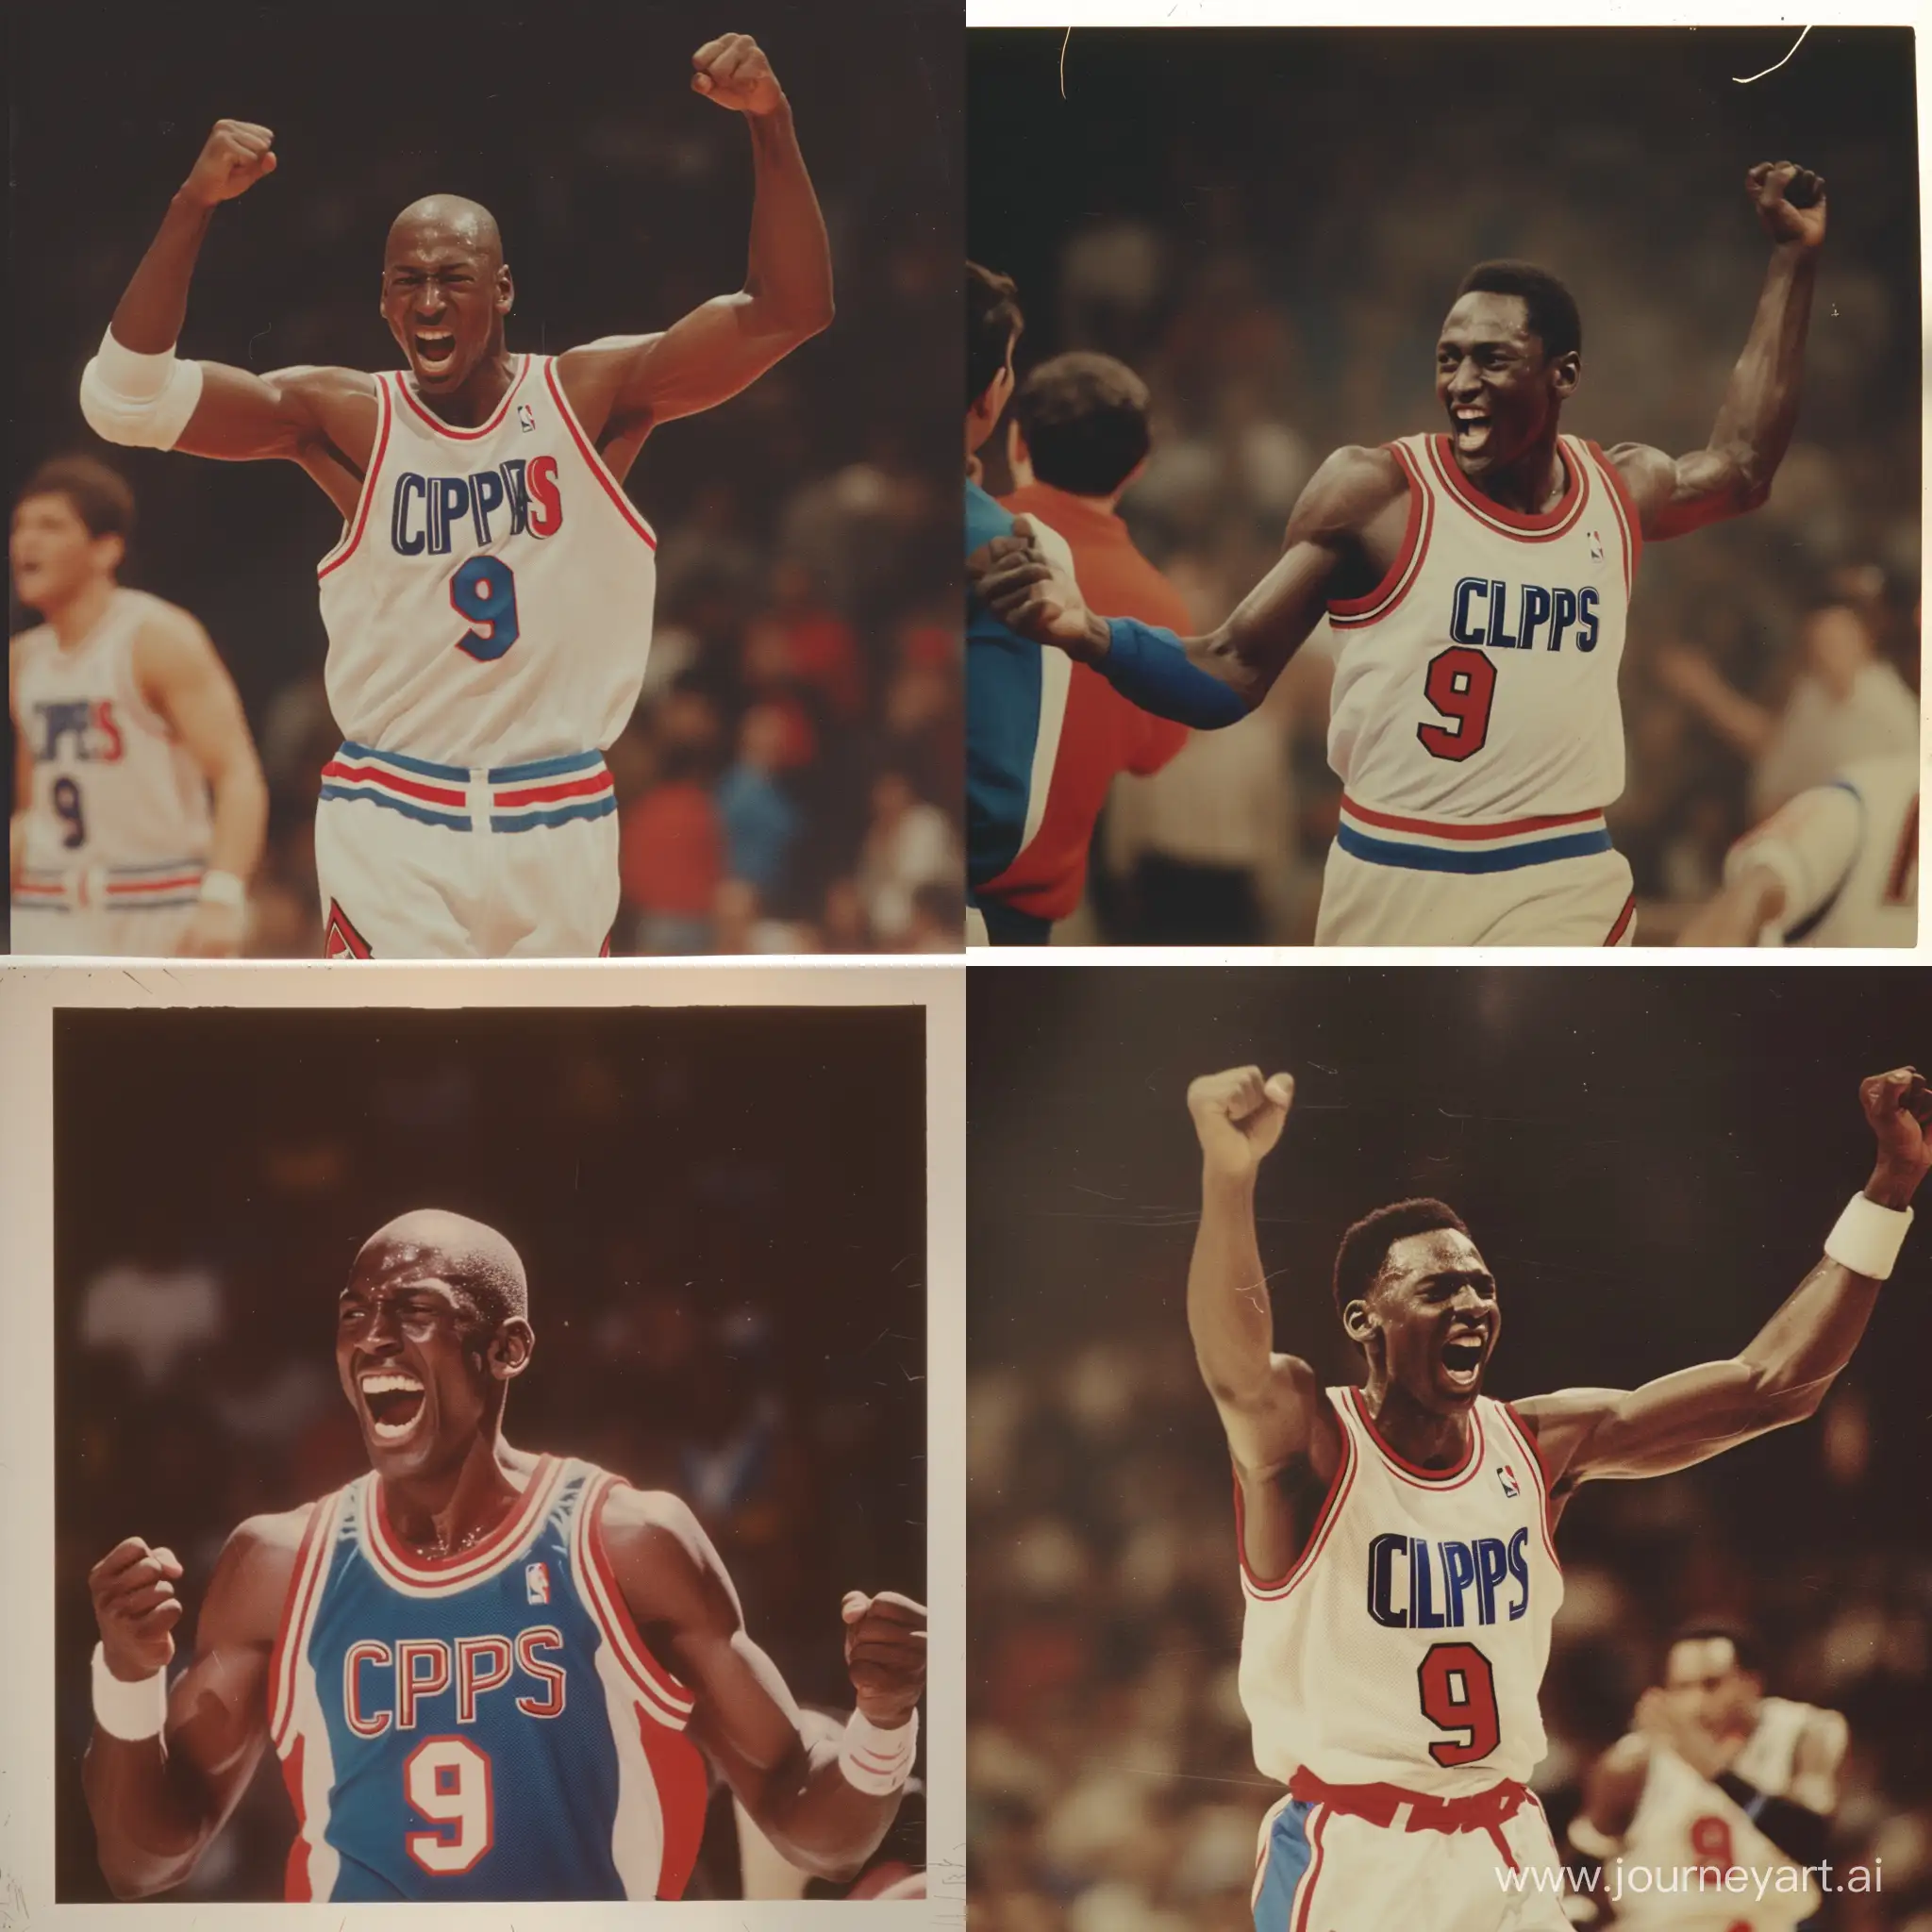 A 1980s photograph of a young Michael Jordan,wearing a Clippers,Jersey with the number 9,Celebrating after a Win